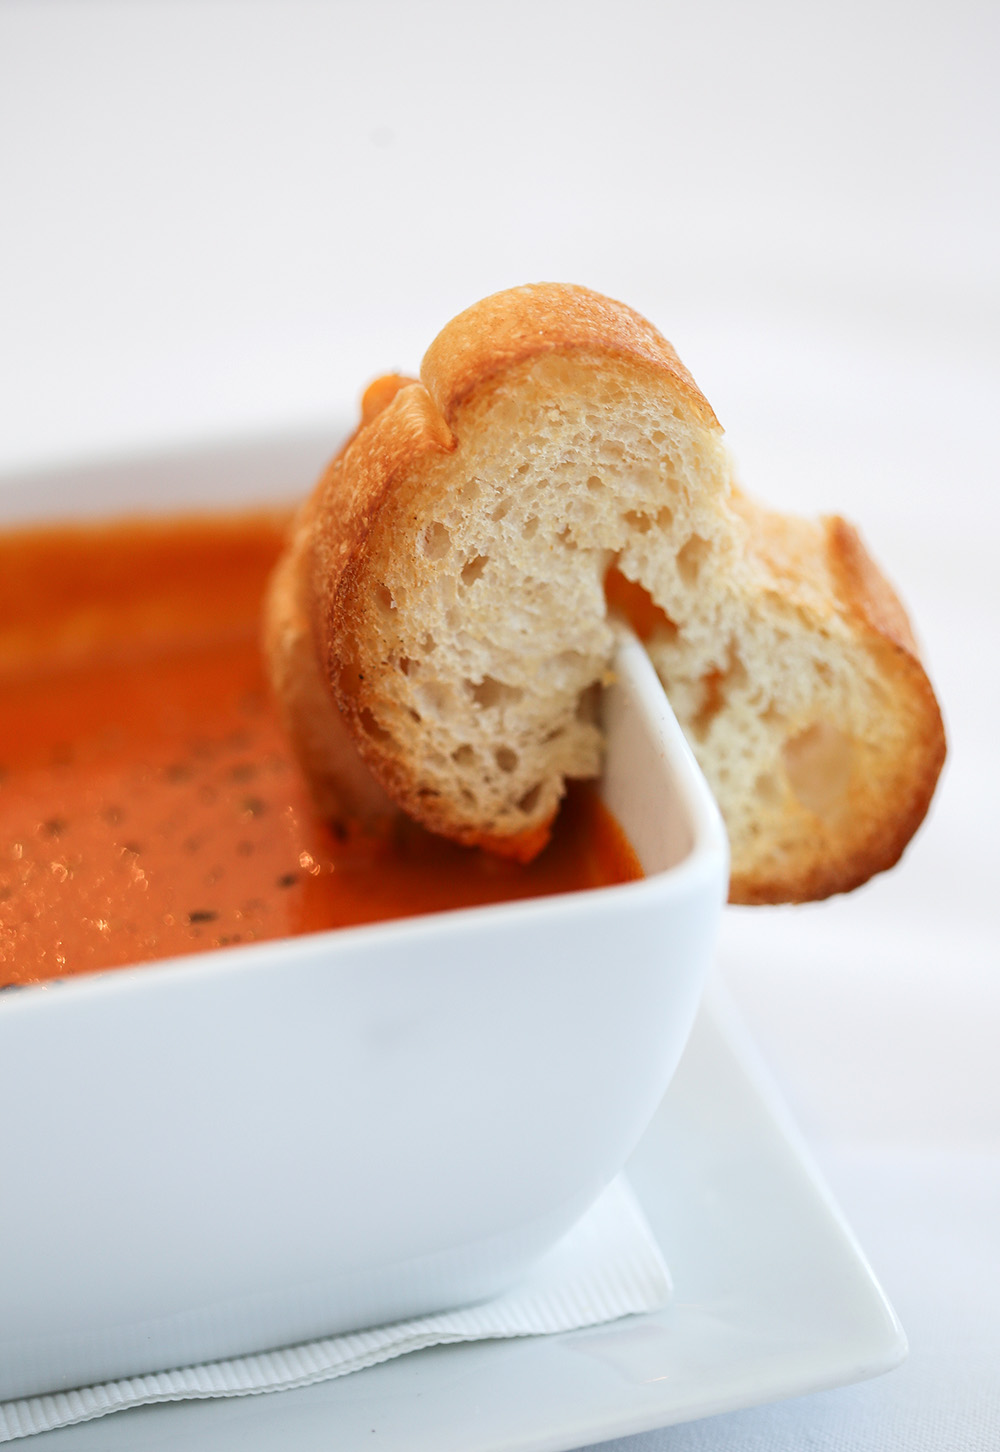 Tomato bisque and mini grilled cheese at Hattie's. Photo by Catherine Downes.